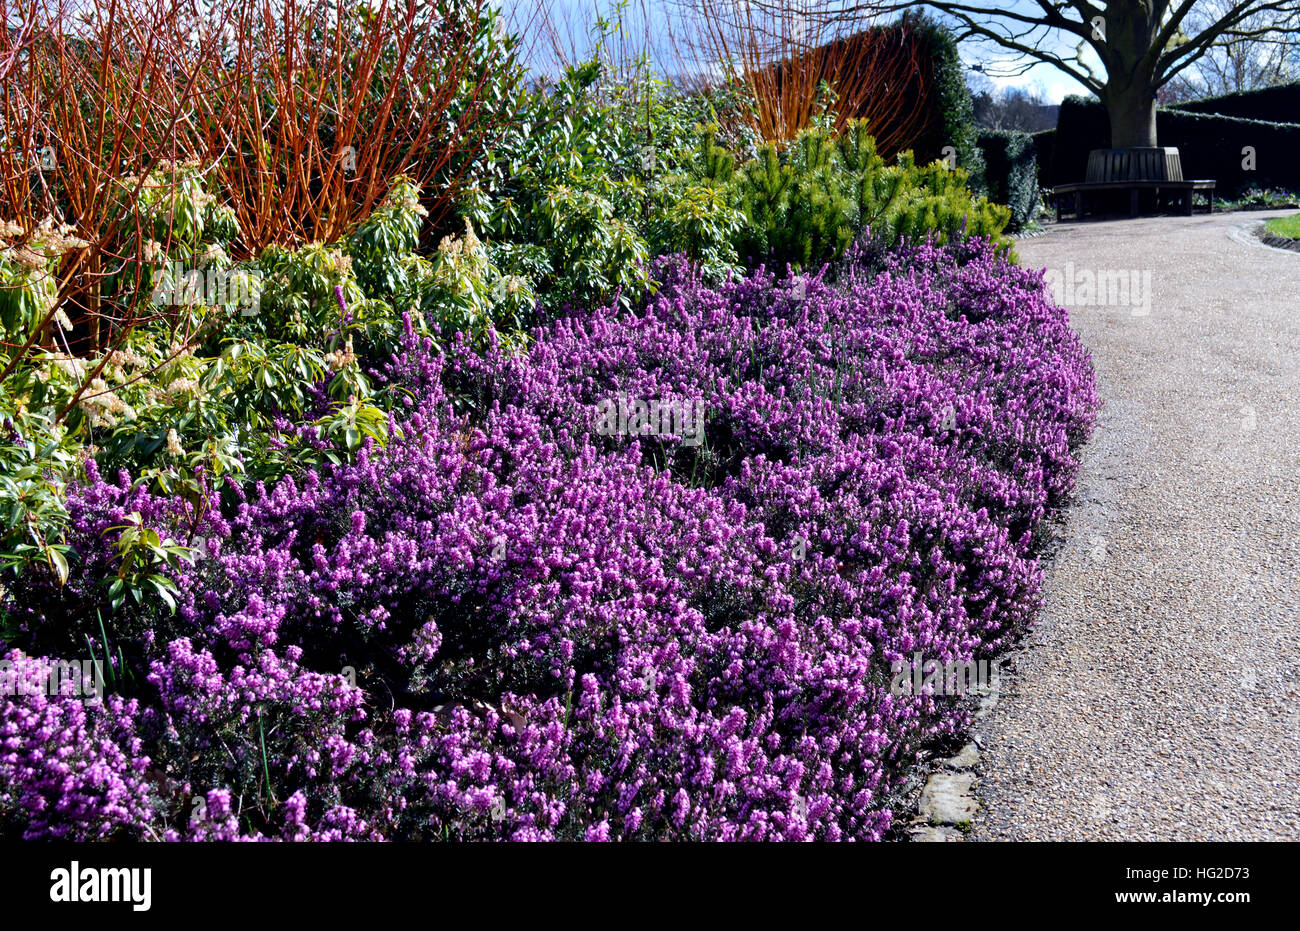 A Colourful Border of Winter Flowering Heathers at RHS Garden Harlow Carr, Harrogate, Yorkshire. England UK. Stock Photo